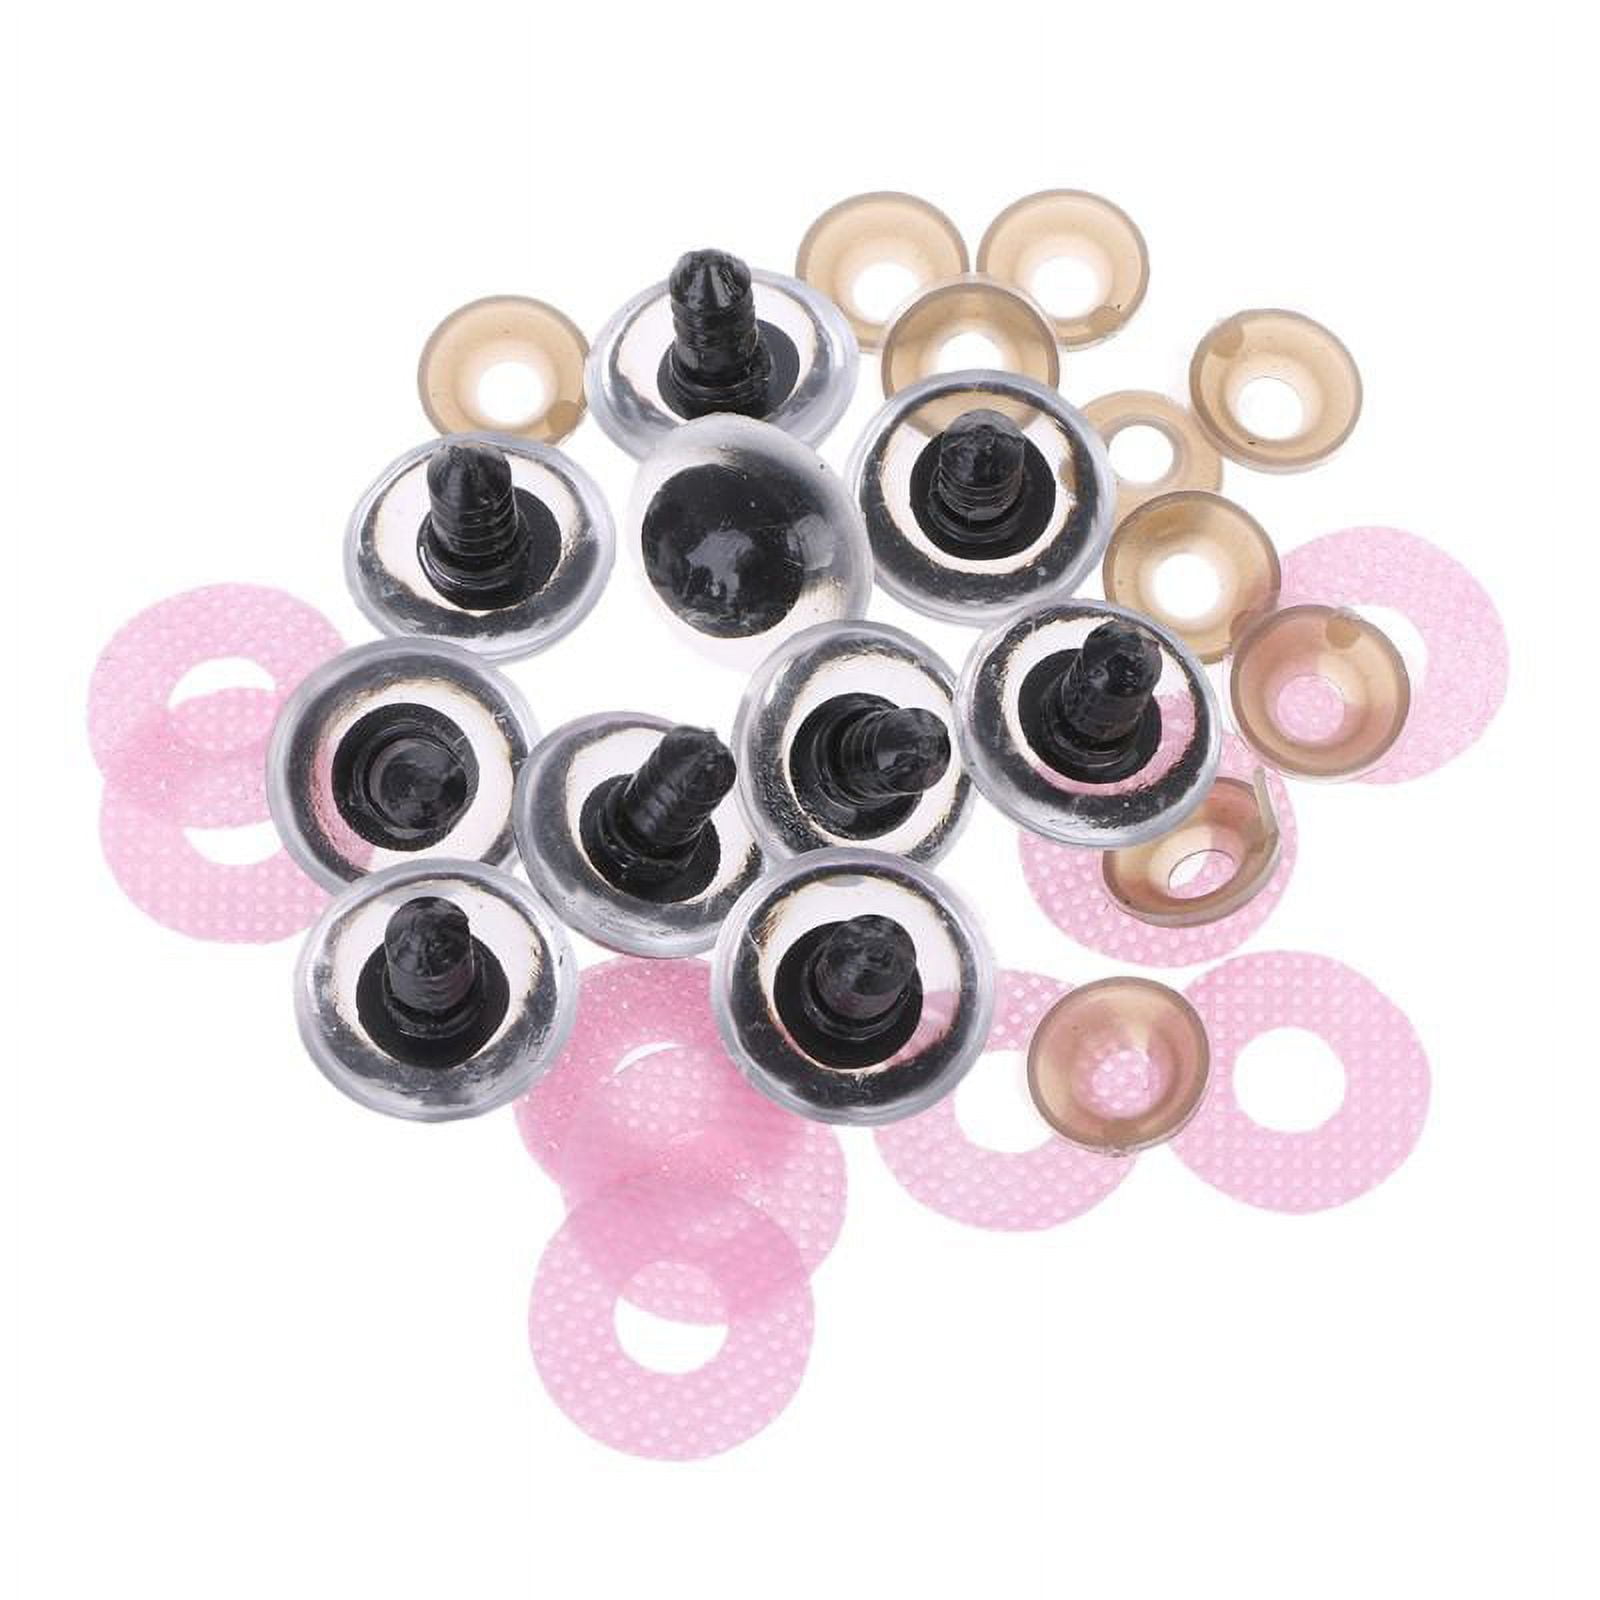 Limited Quantity! 25mm White Round Googly Safety Eyes with Washers – 1 Pair  / Amigurumi / Doll / Craft Eye / Animal / Toy / Googly / Crochet